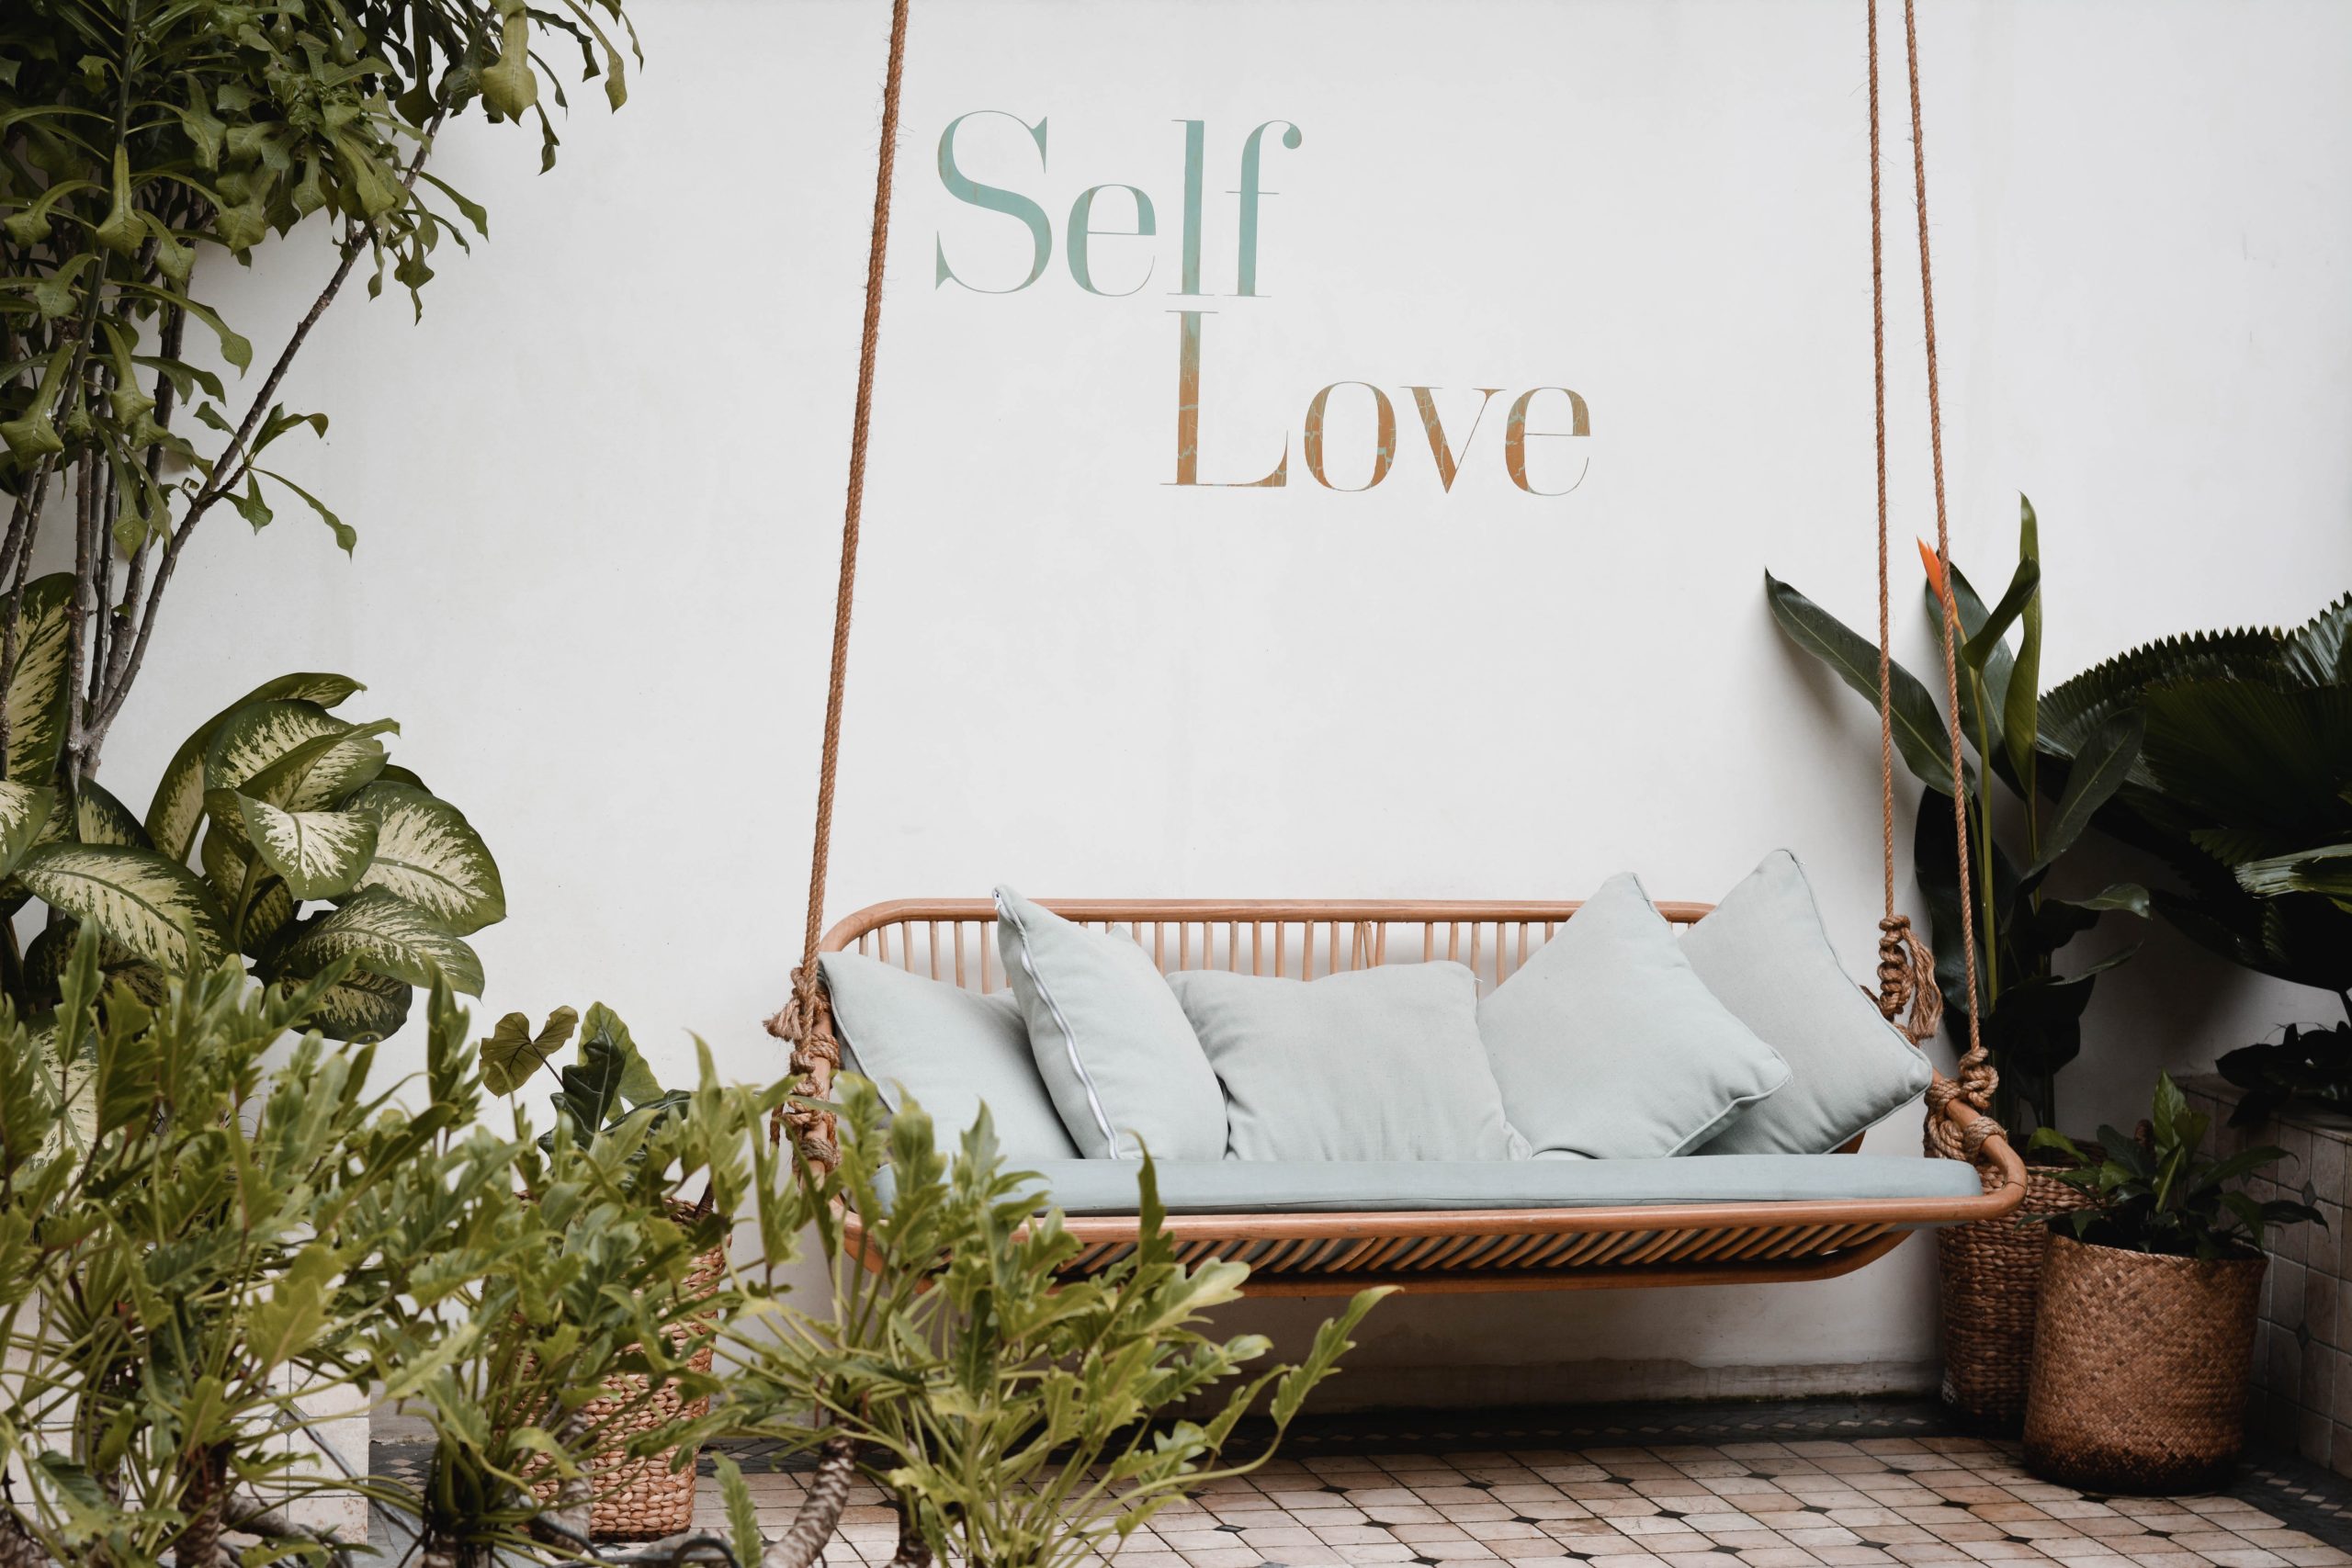 Self love sign over swinging couch surrounded by green plants